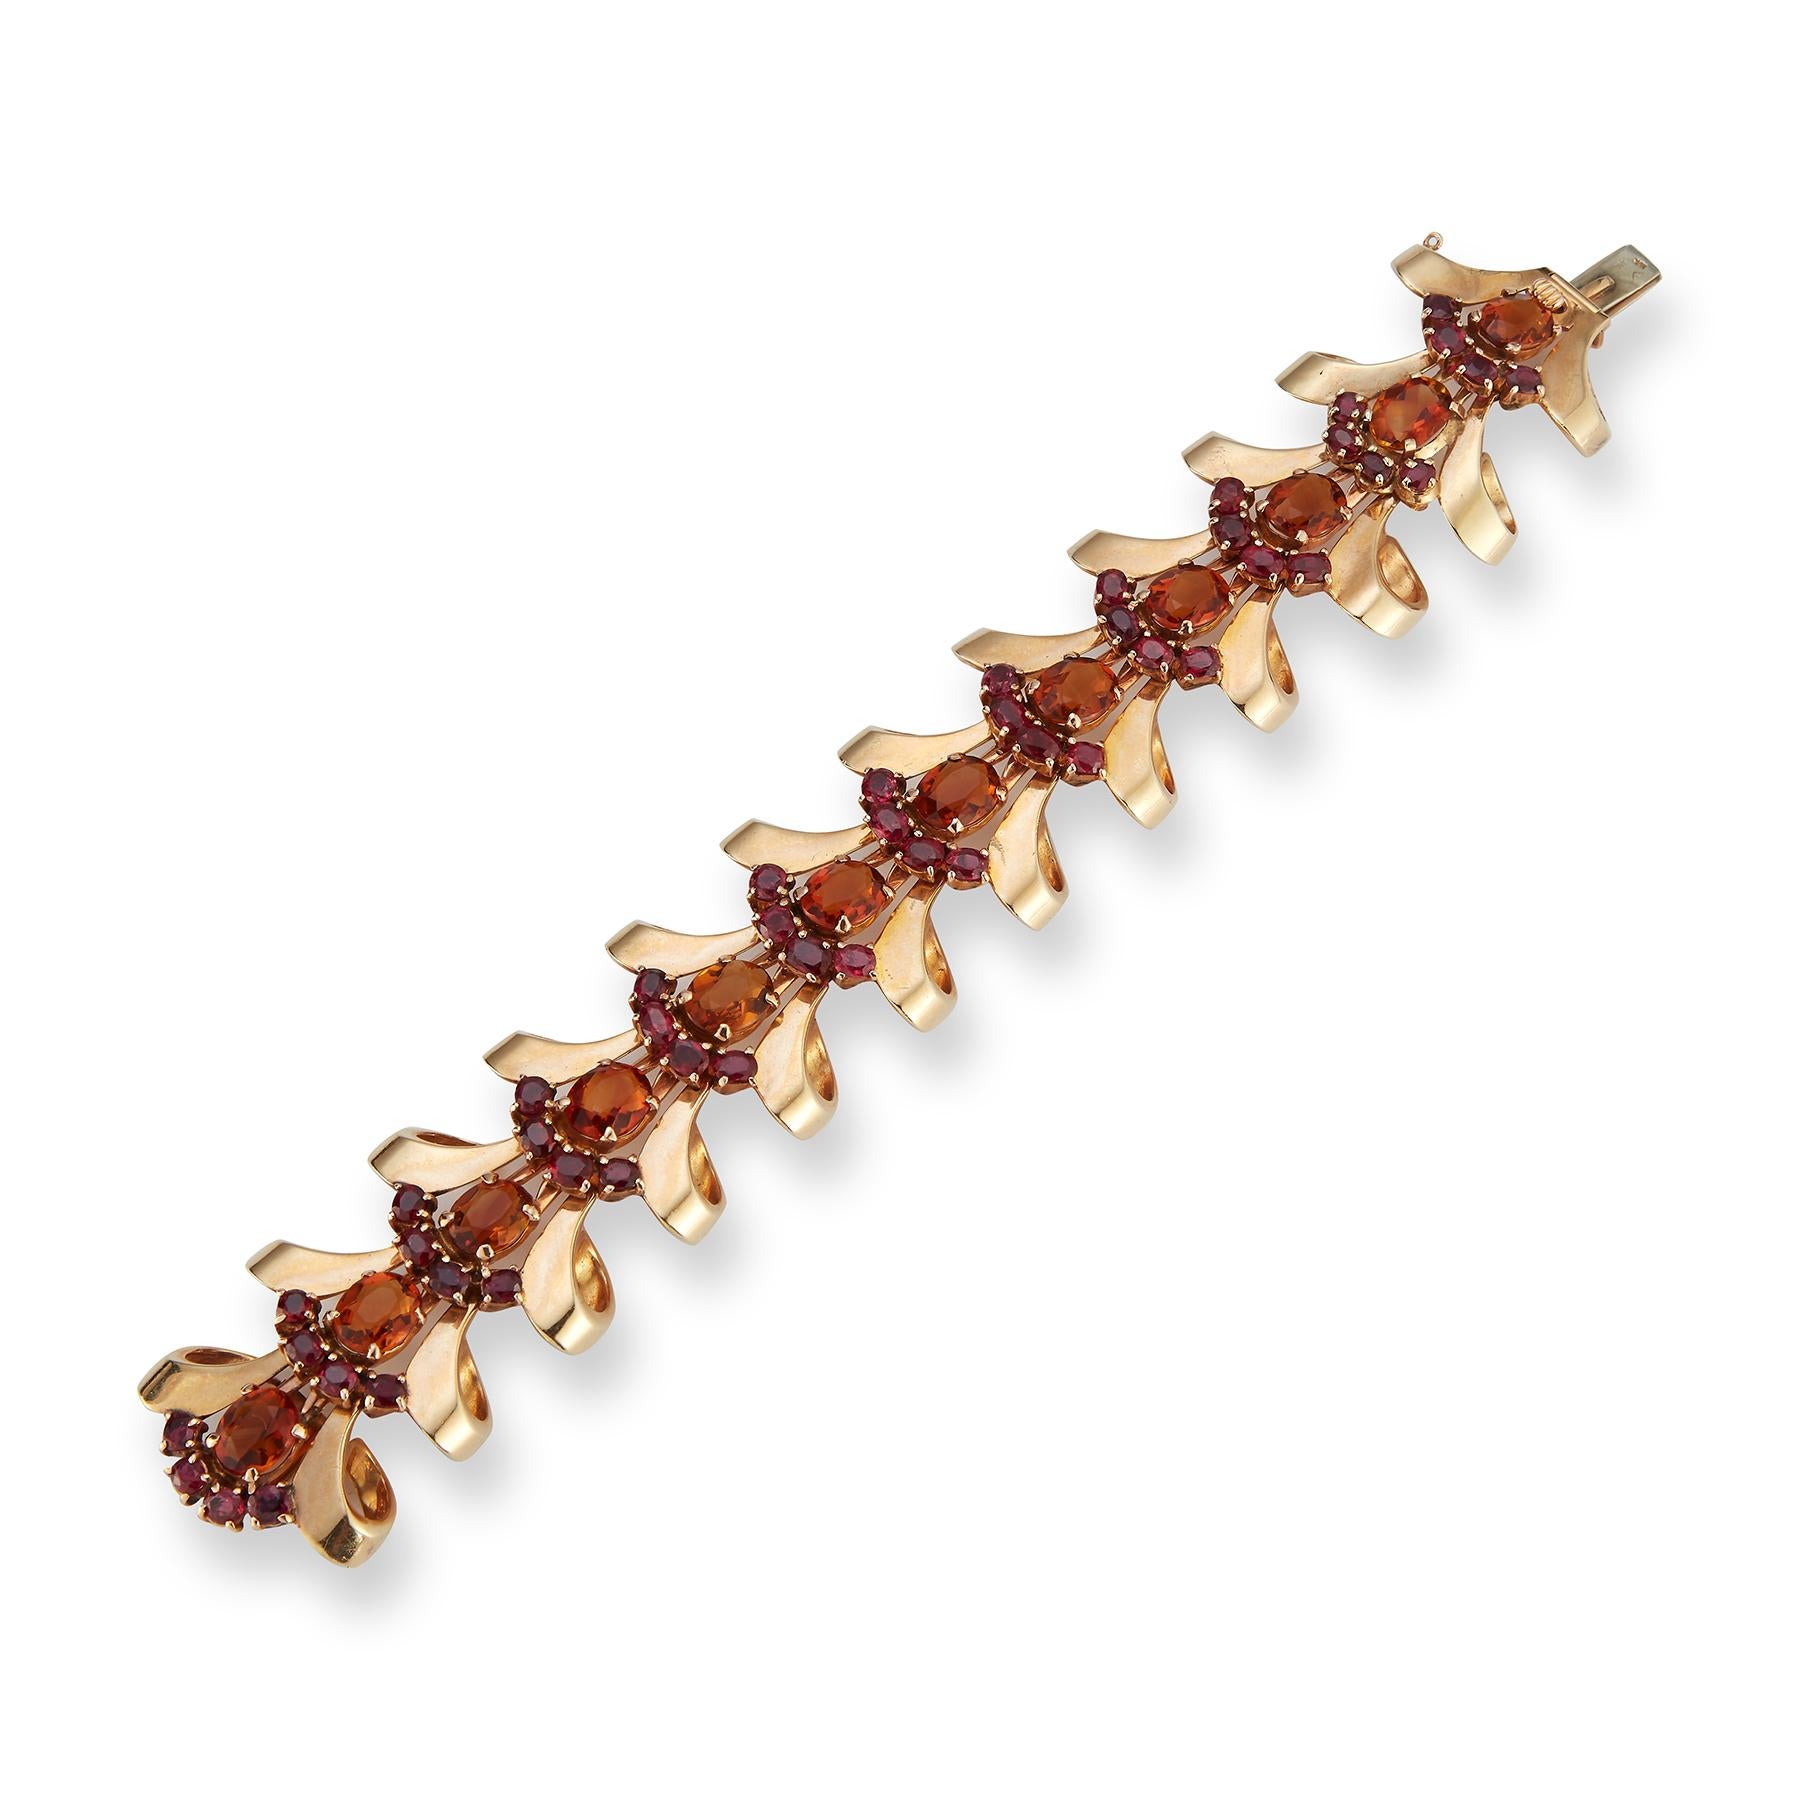 Retro Ruby and Citrine Gold bracelet

12 oval citrines weigh approx 48 cts
48 rubies weigh approx 9.6 cts


Made Circa 1940
Approx 1.20 inches wide
8 inches long
80.1 grams
14 karat gold